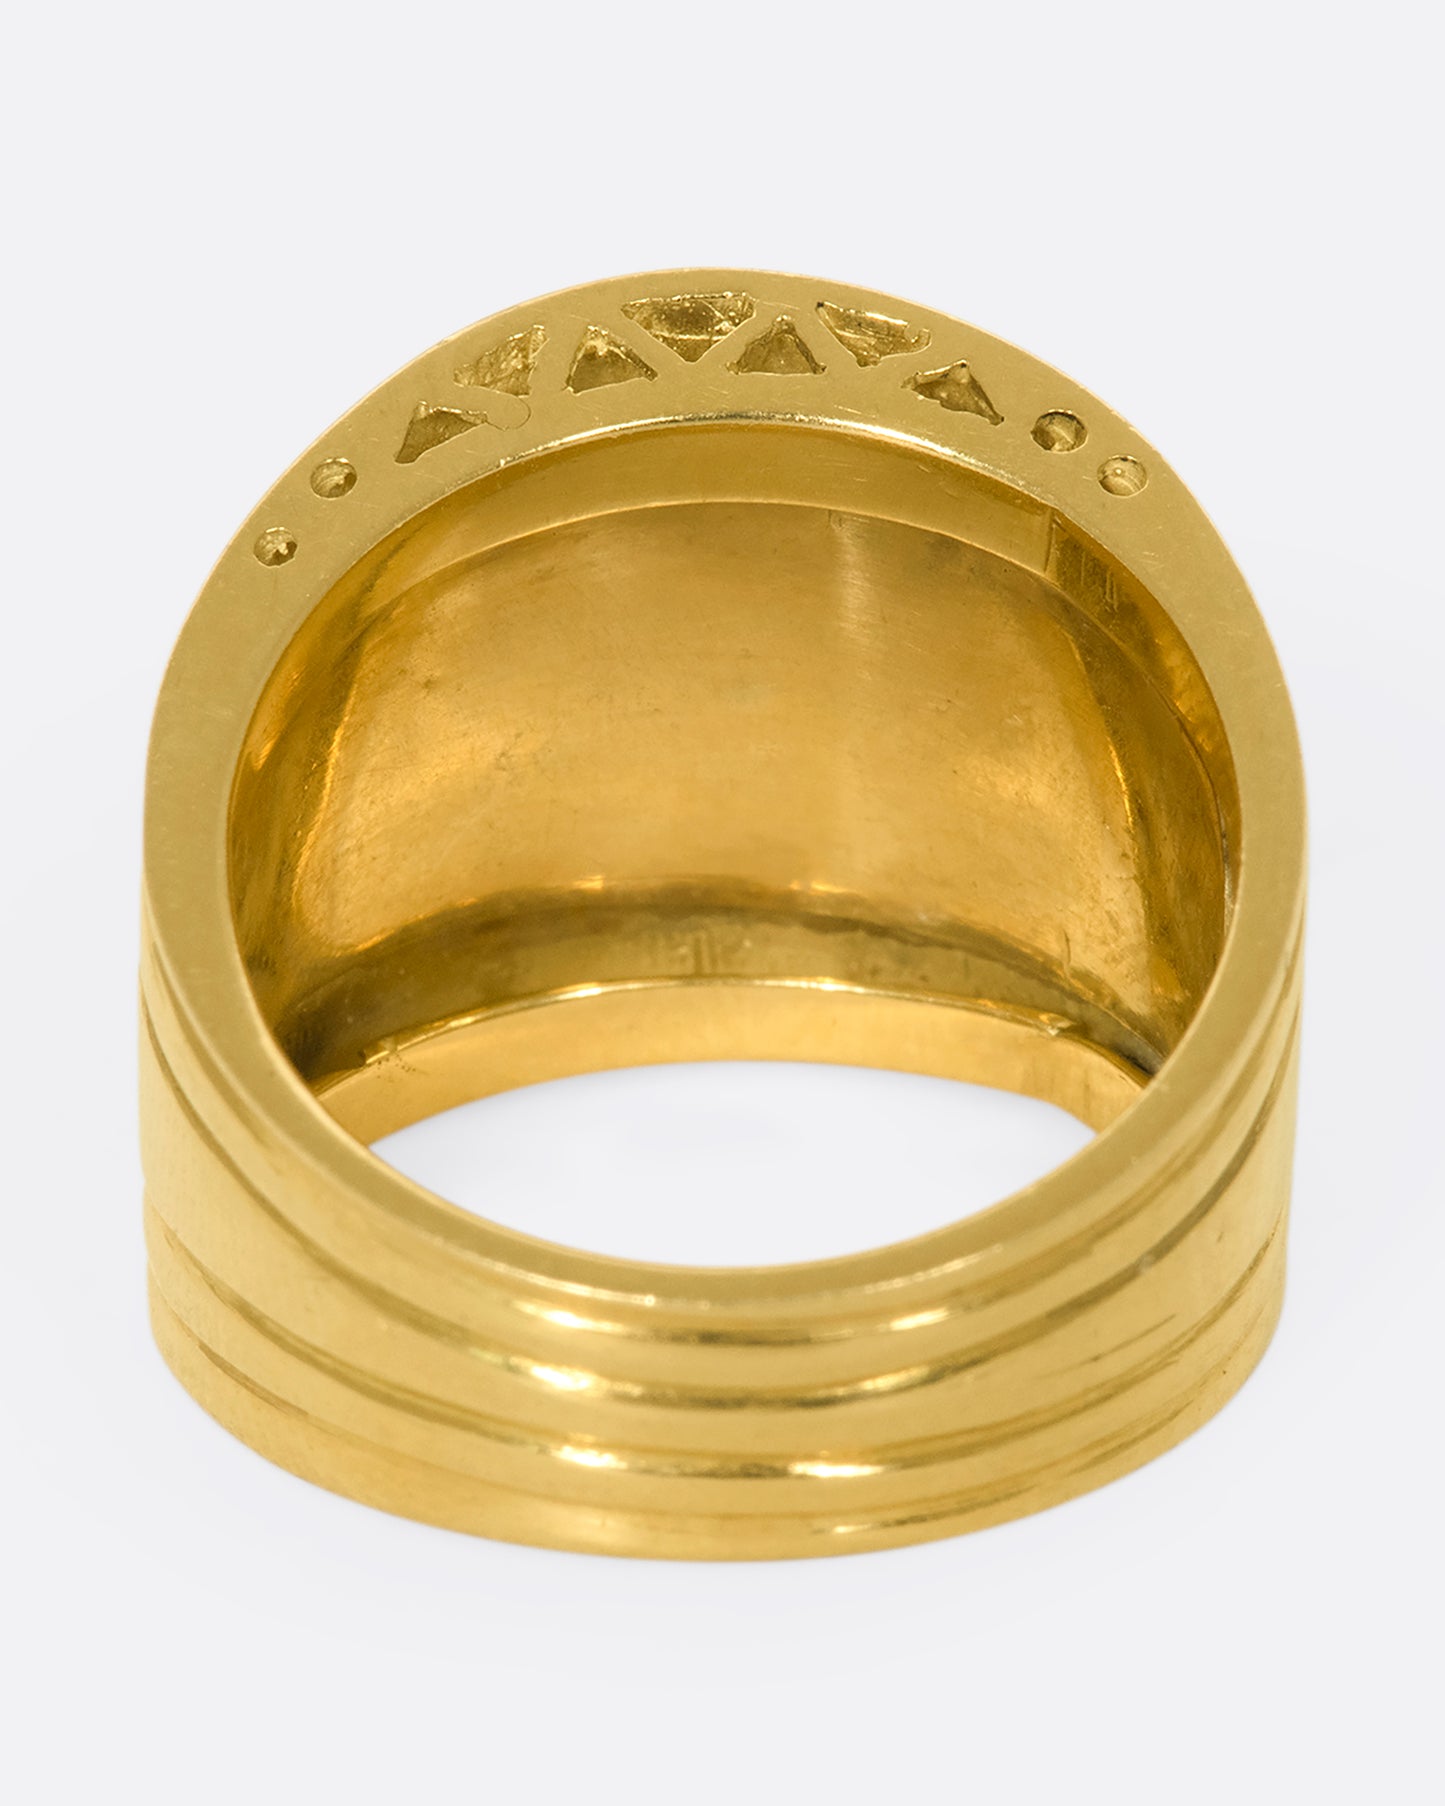 A view of the underside view of a wide, tapered yellow gold ring with mother of pearl and lapis inlaid stripes.